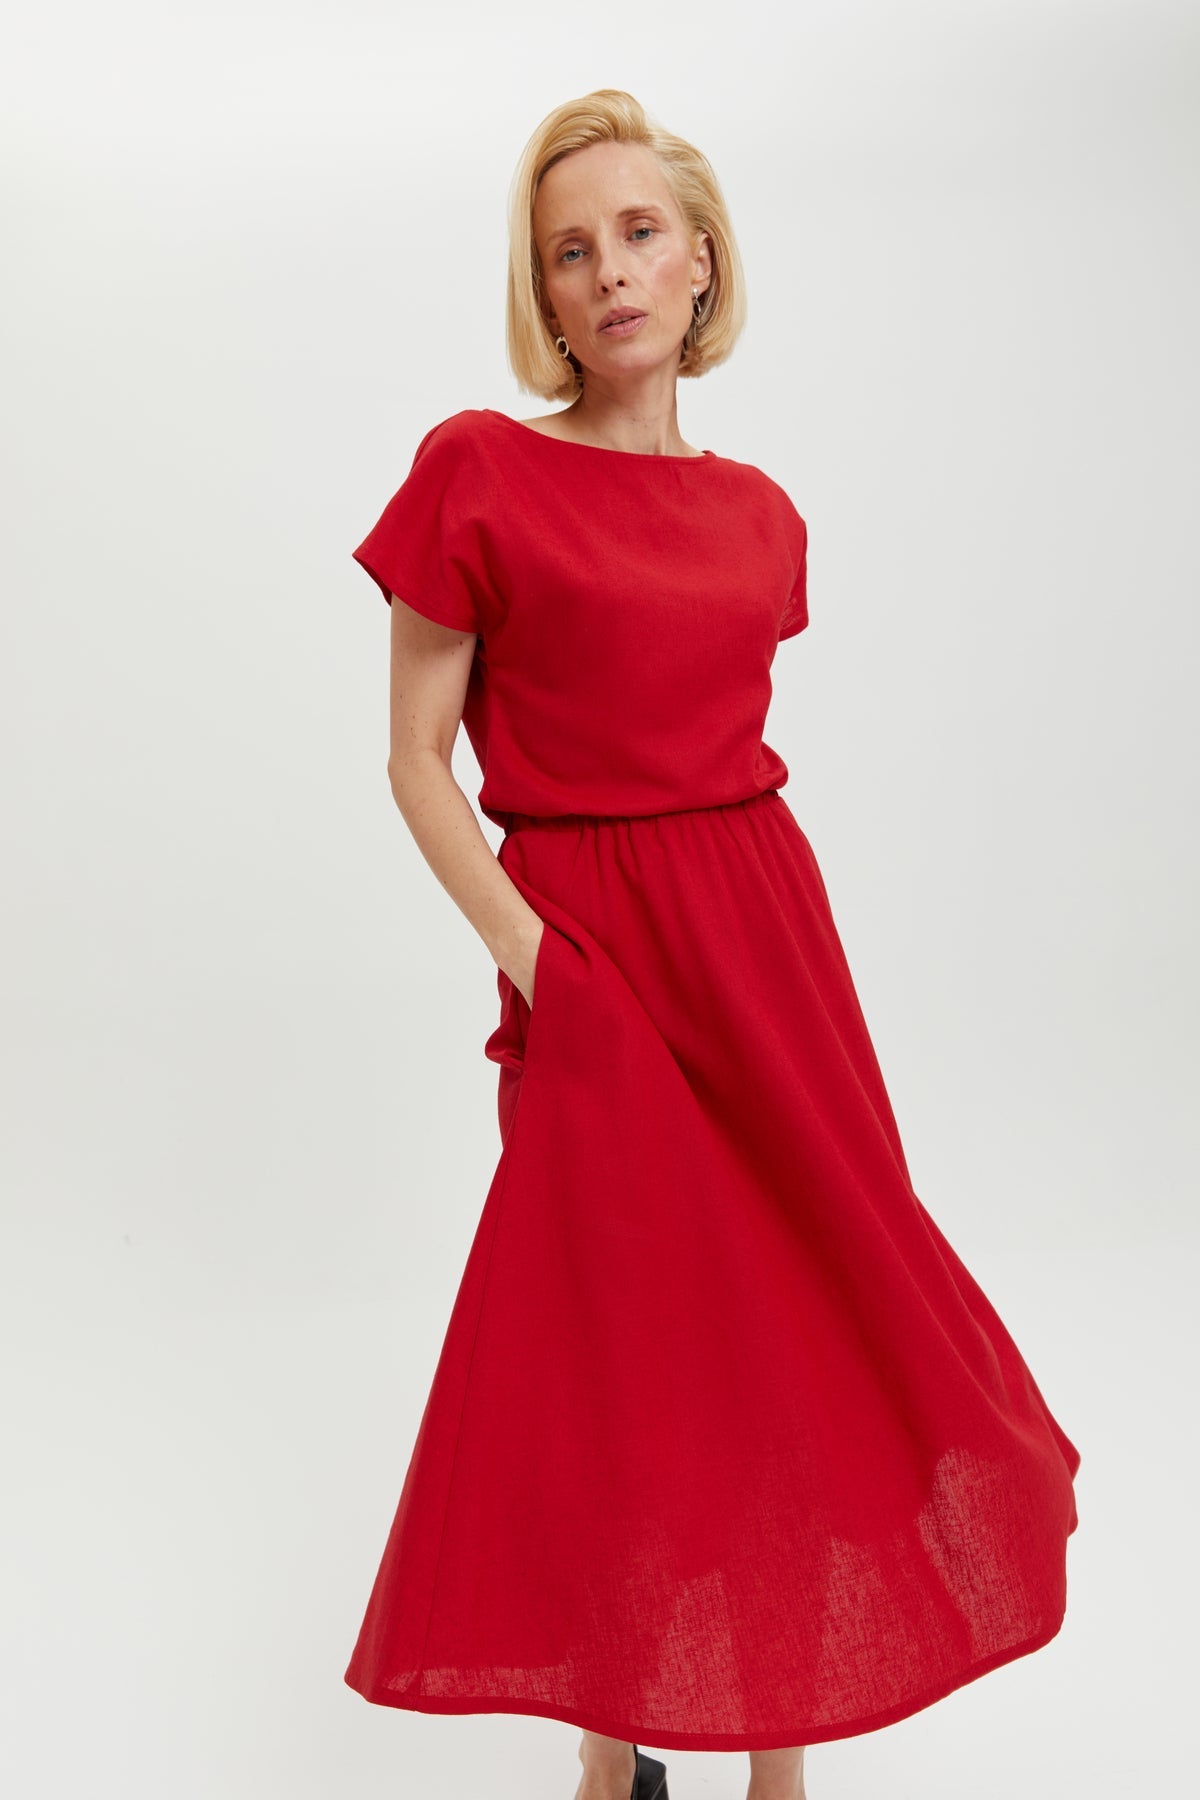 Nane | Linen dress with short sleeves in red by Ayani